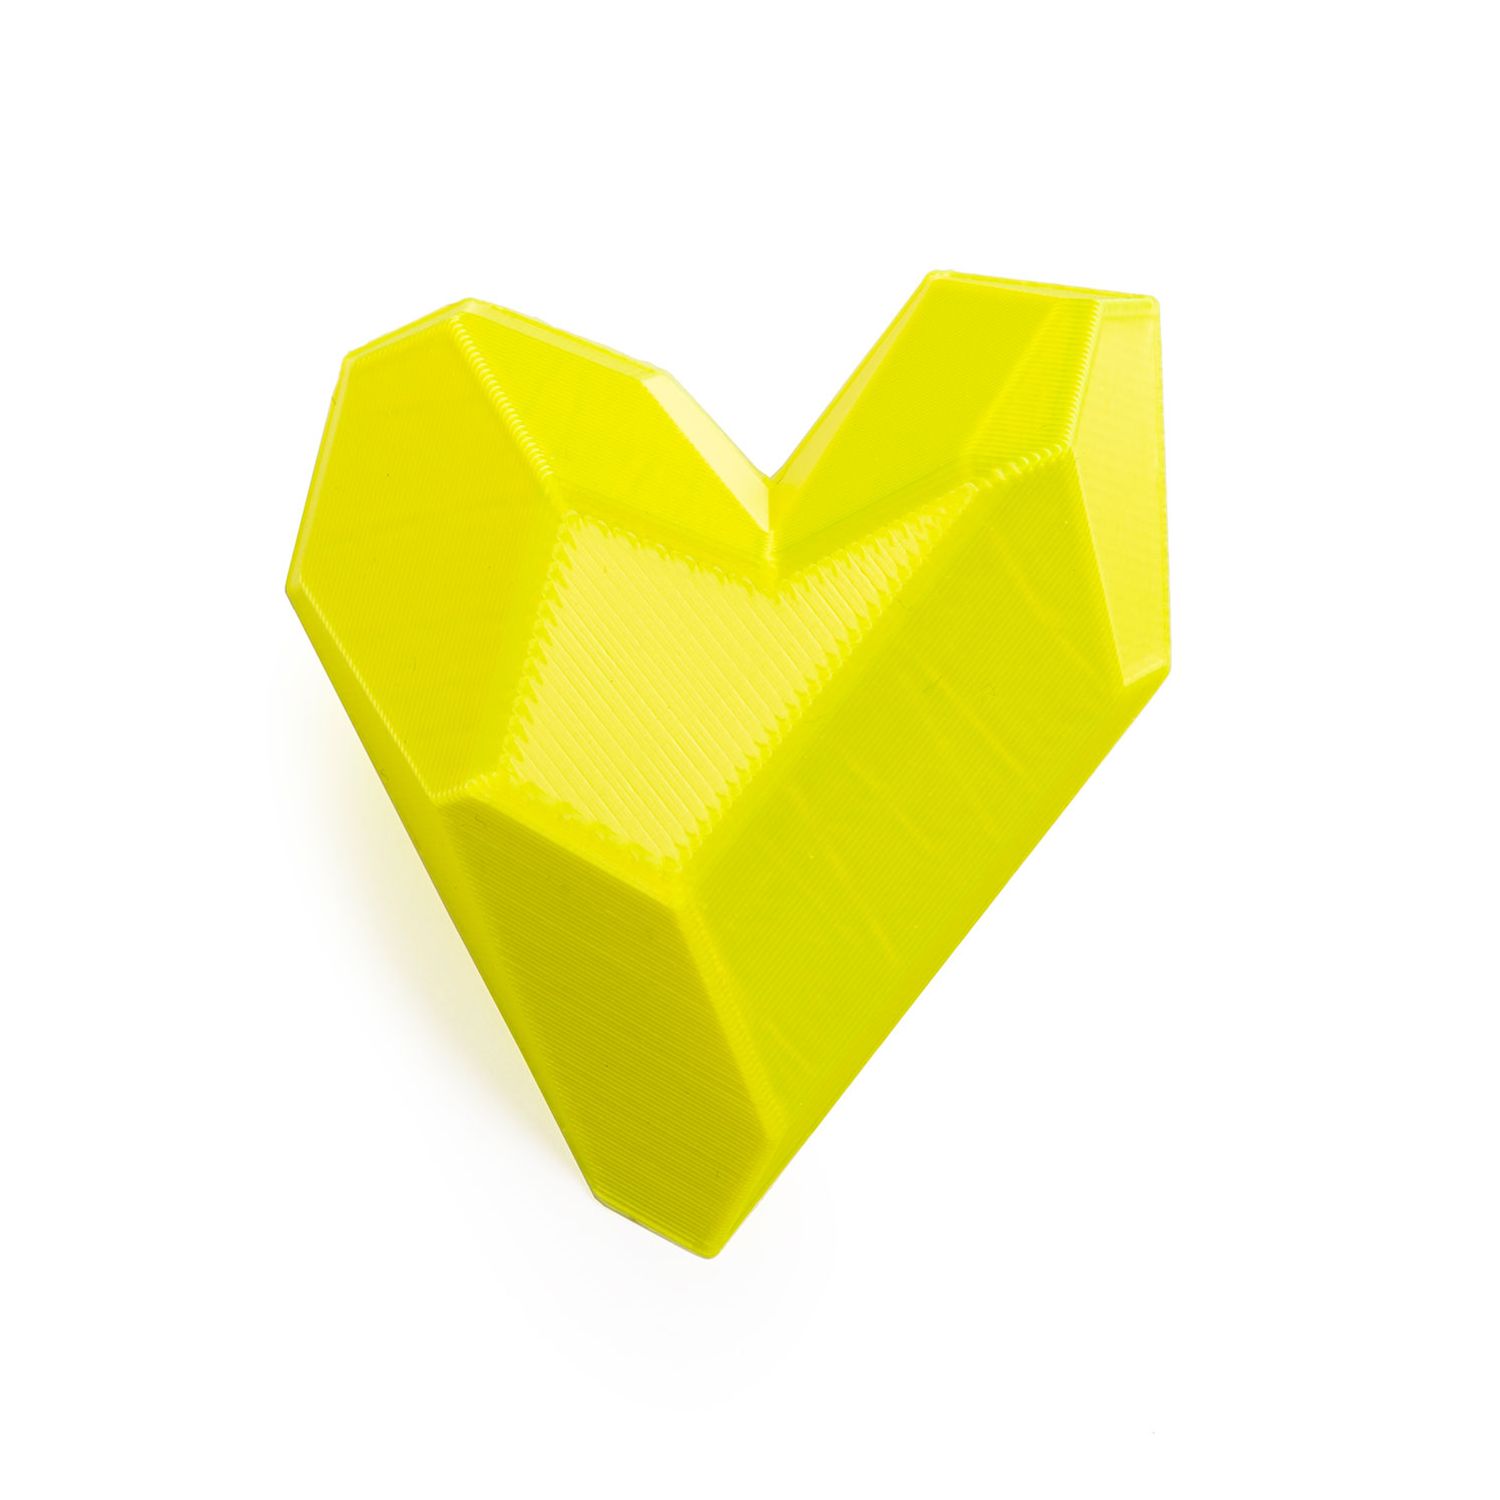 Maison 203: Heart Brooch – Fluorescent Yellow Product Image 1 of 3